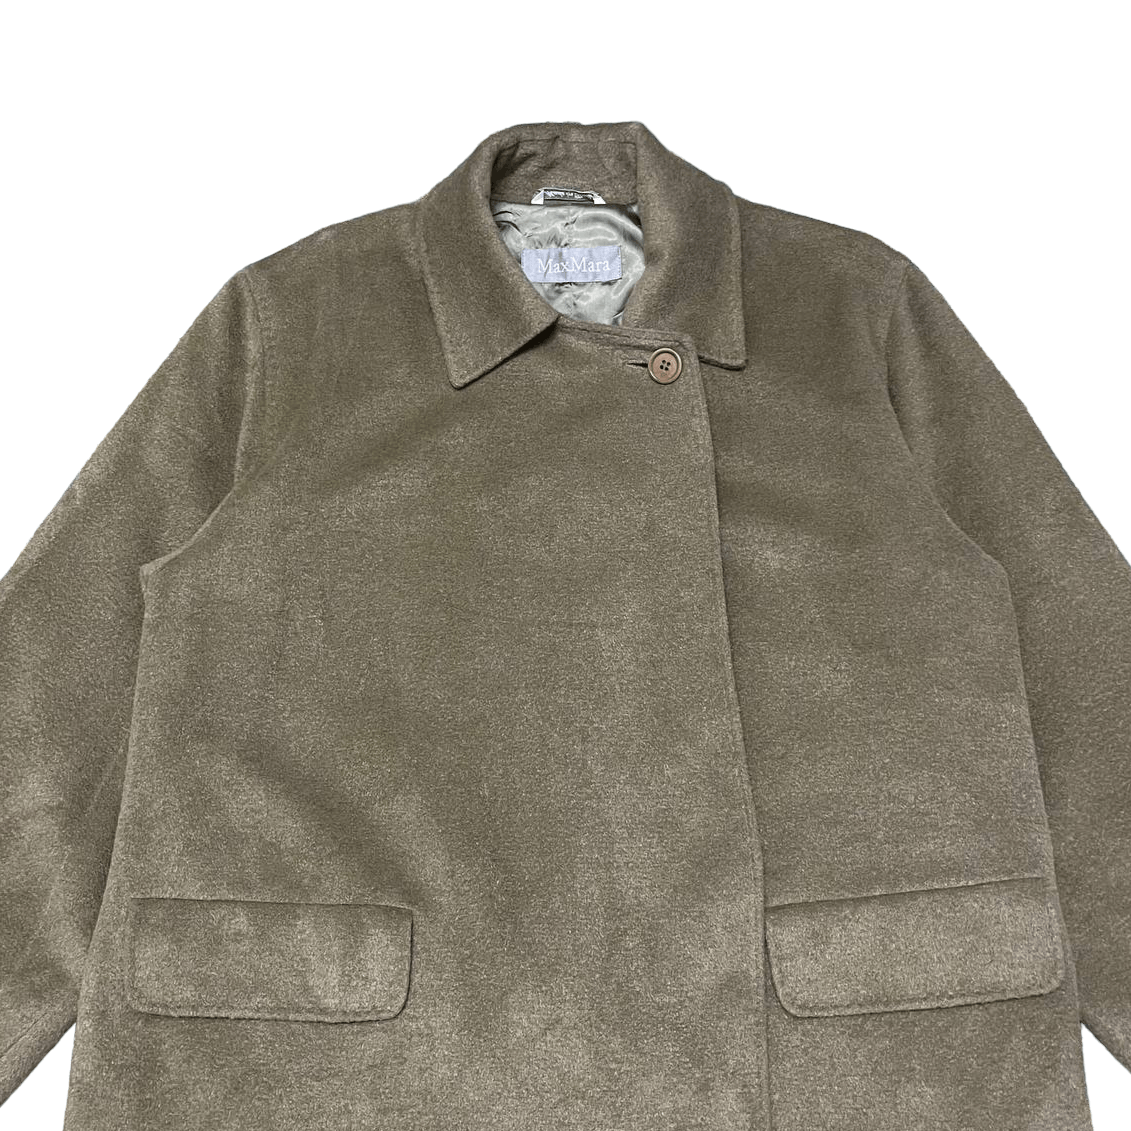 Max Mara Made in Italy One Button Wool Coat - 2